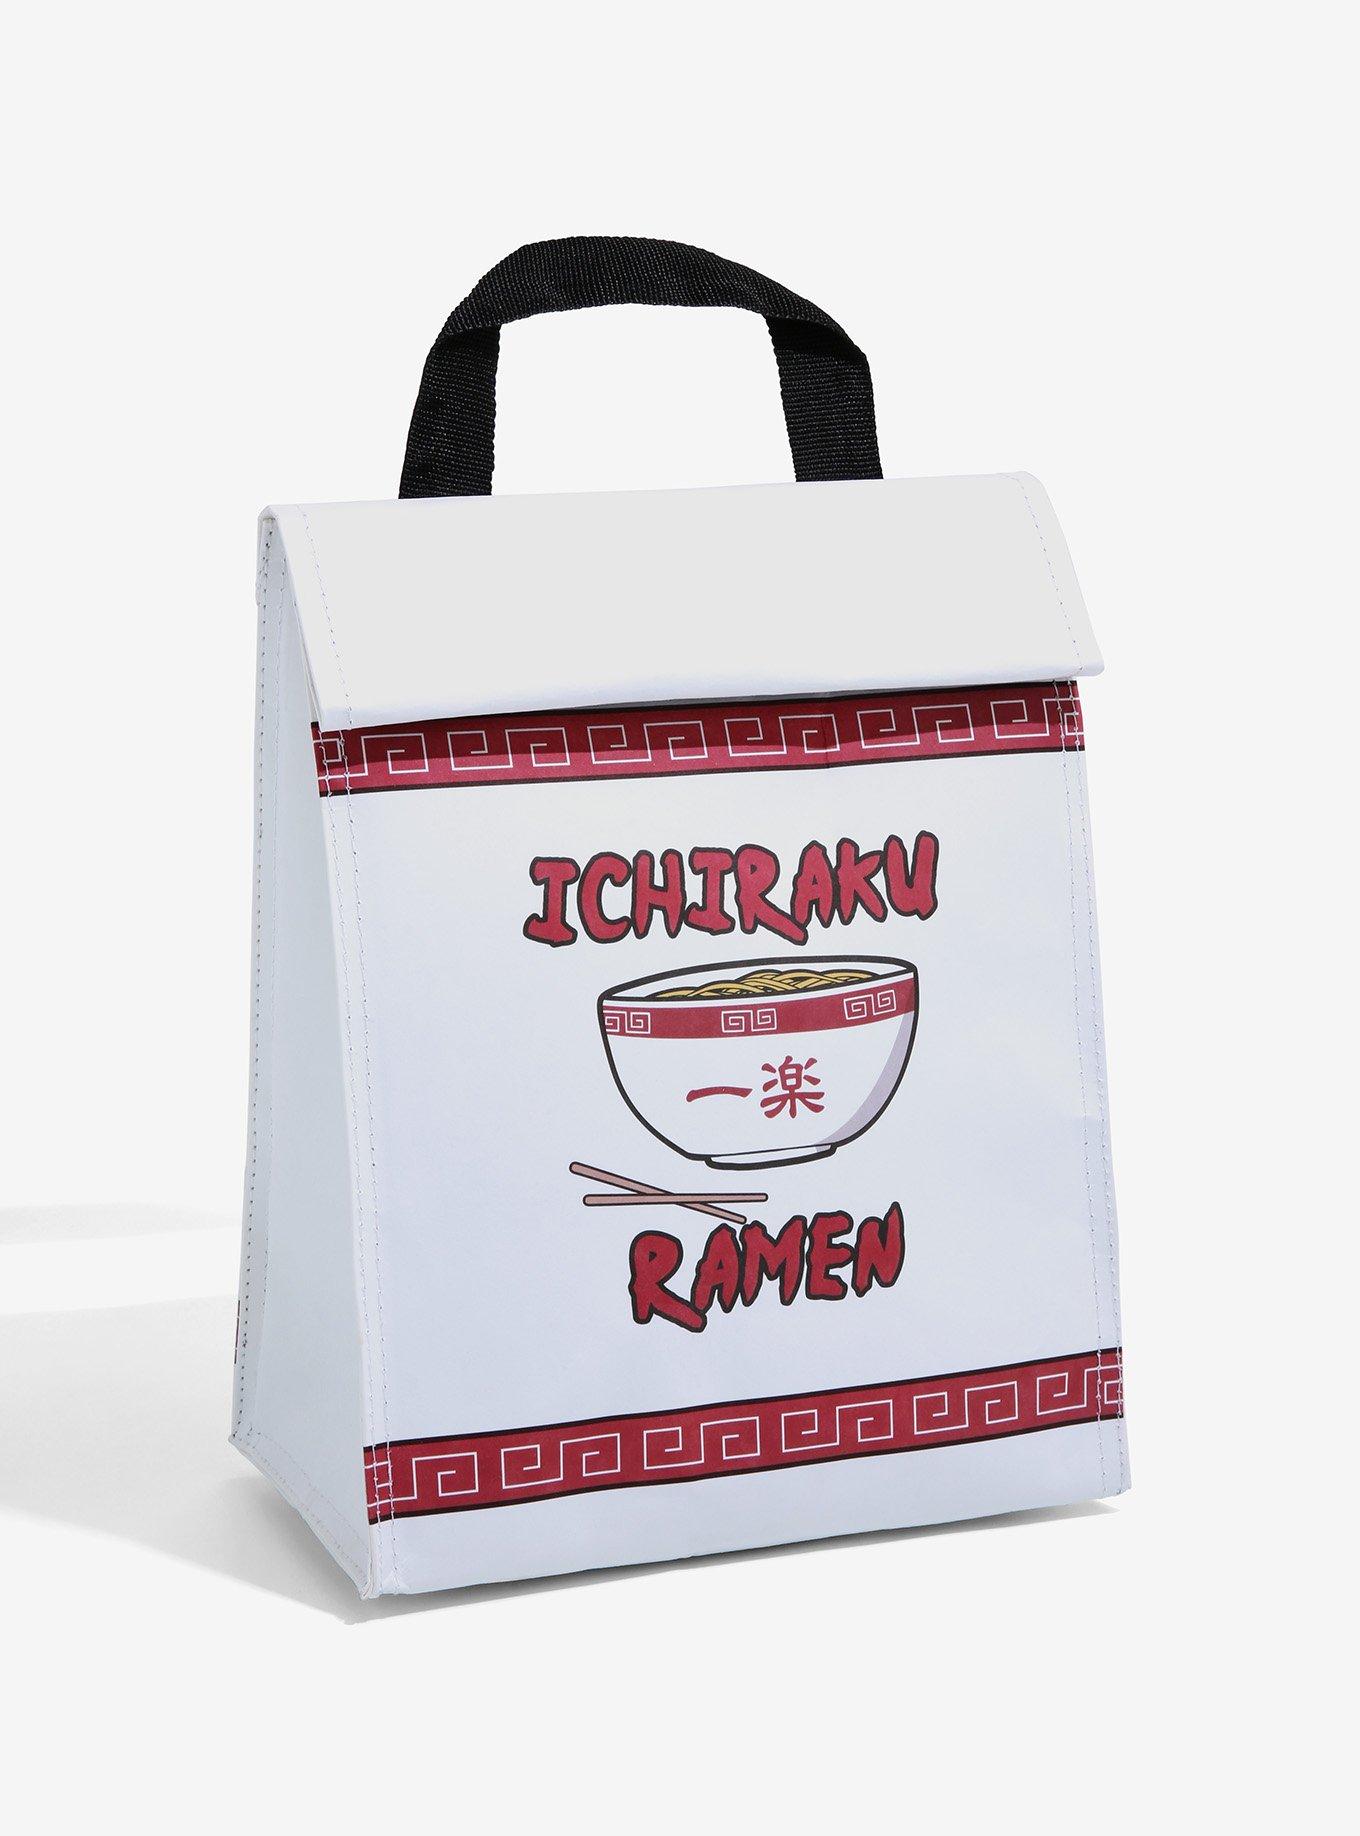 Maruchan Insulated Lunch Bag - BoxLunch Exclusive